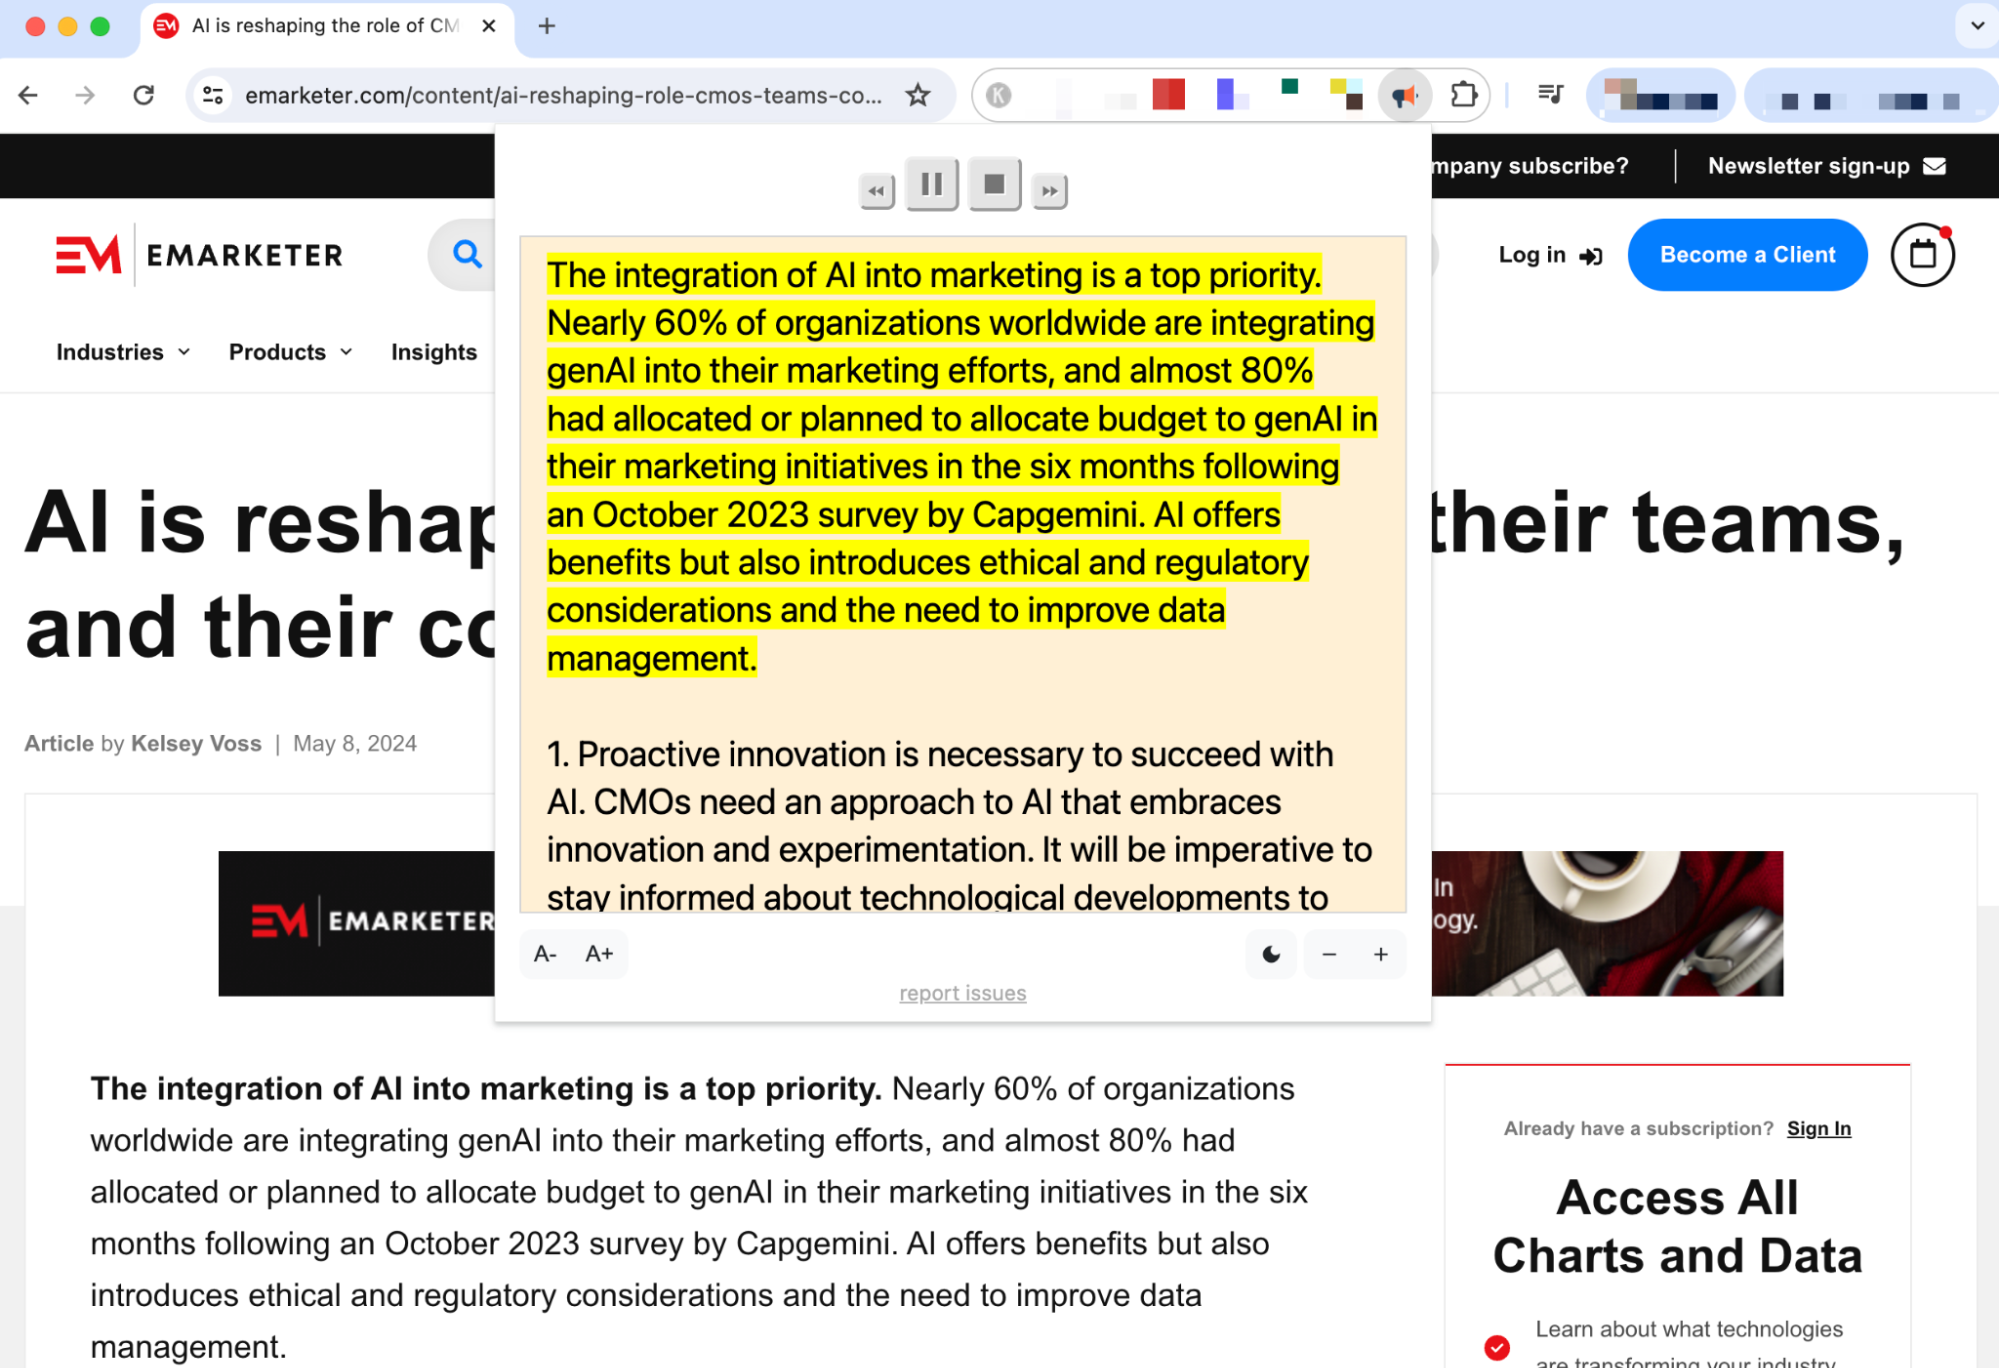 Highlighted note shows AI integration is a priority for marketers, quoting  Capgemini survey.